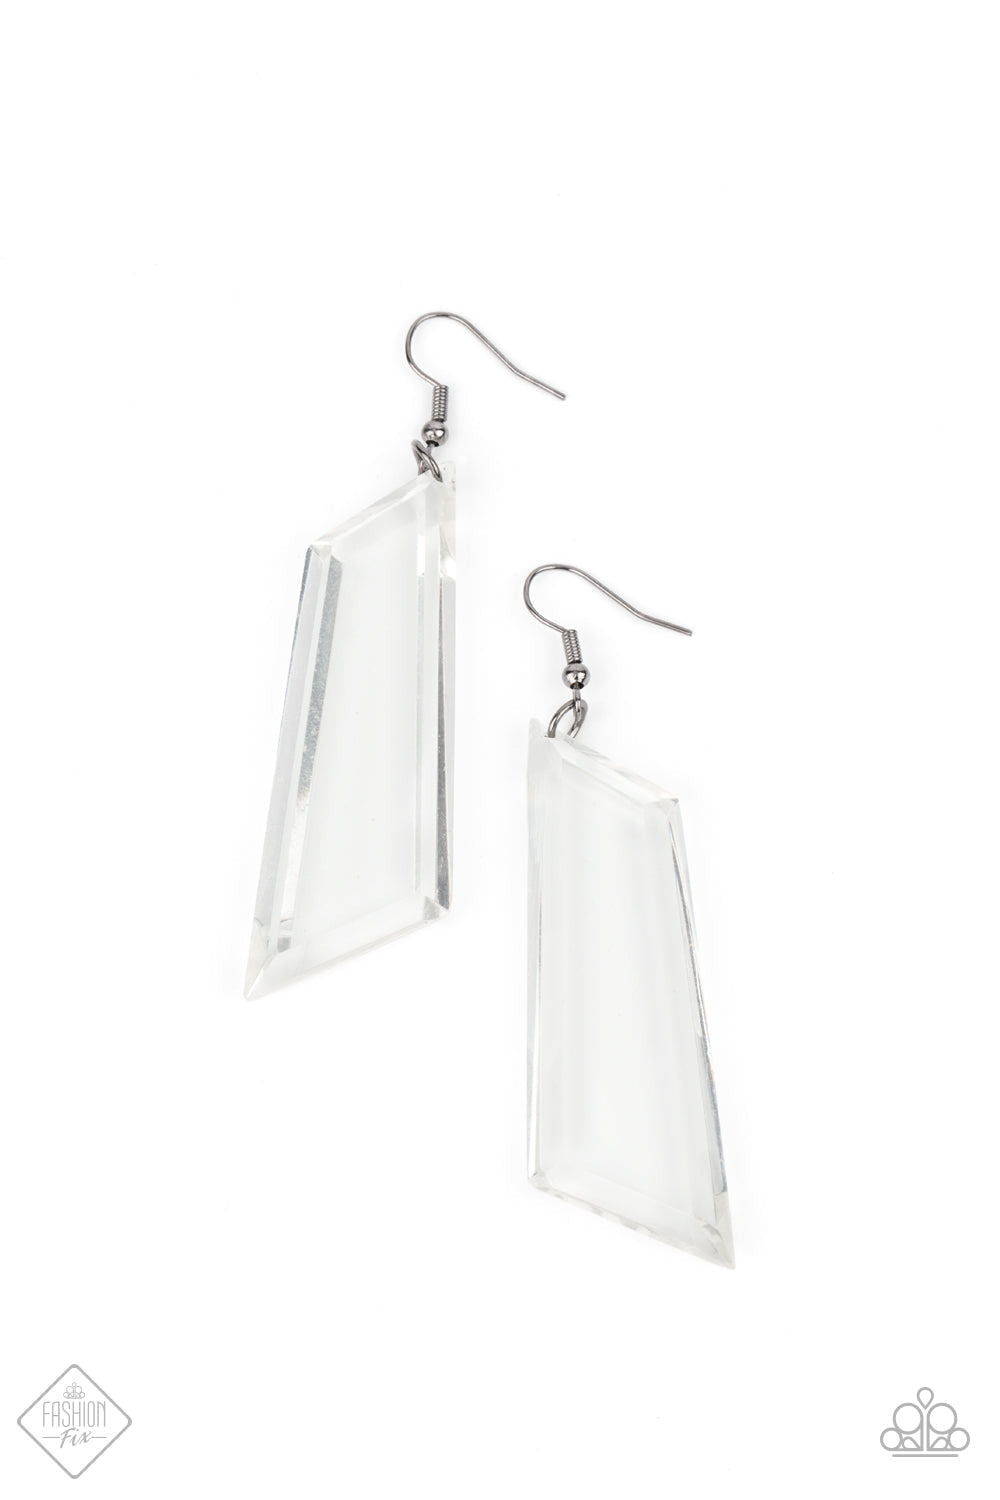 The Final Cut - Black Metal - Clear Acrylic Earrings - Paparazzi Accessories - Featuring a flashy emerald-like cut, an asymmetrical crystal-like acrylic frame swings from the ear, casting rainbow reflections with its glassy exterior. Earring attaches to a standard fishhook fitting. Sold as one pair of earrings.